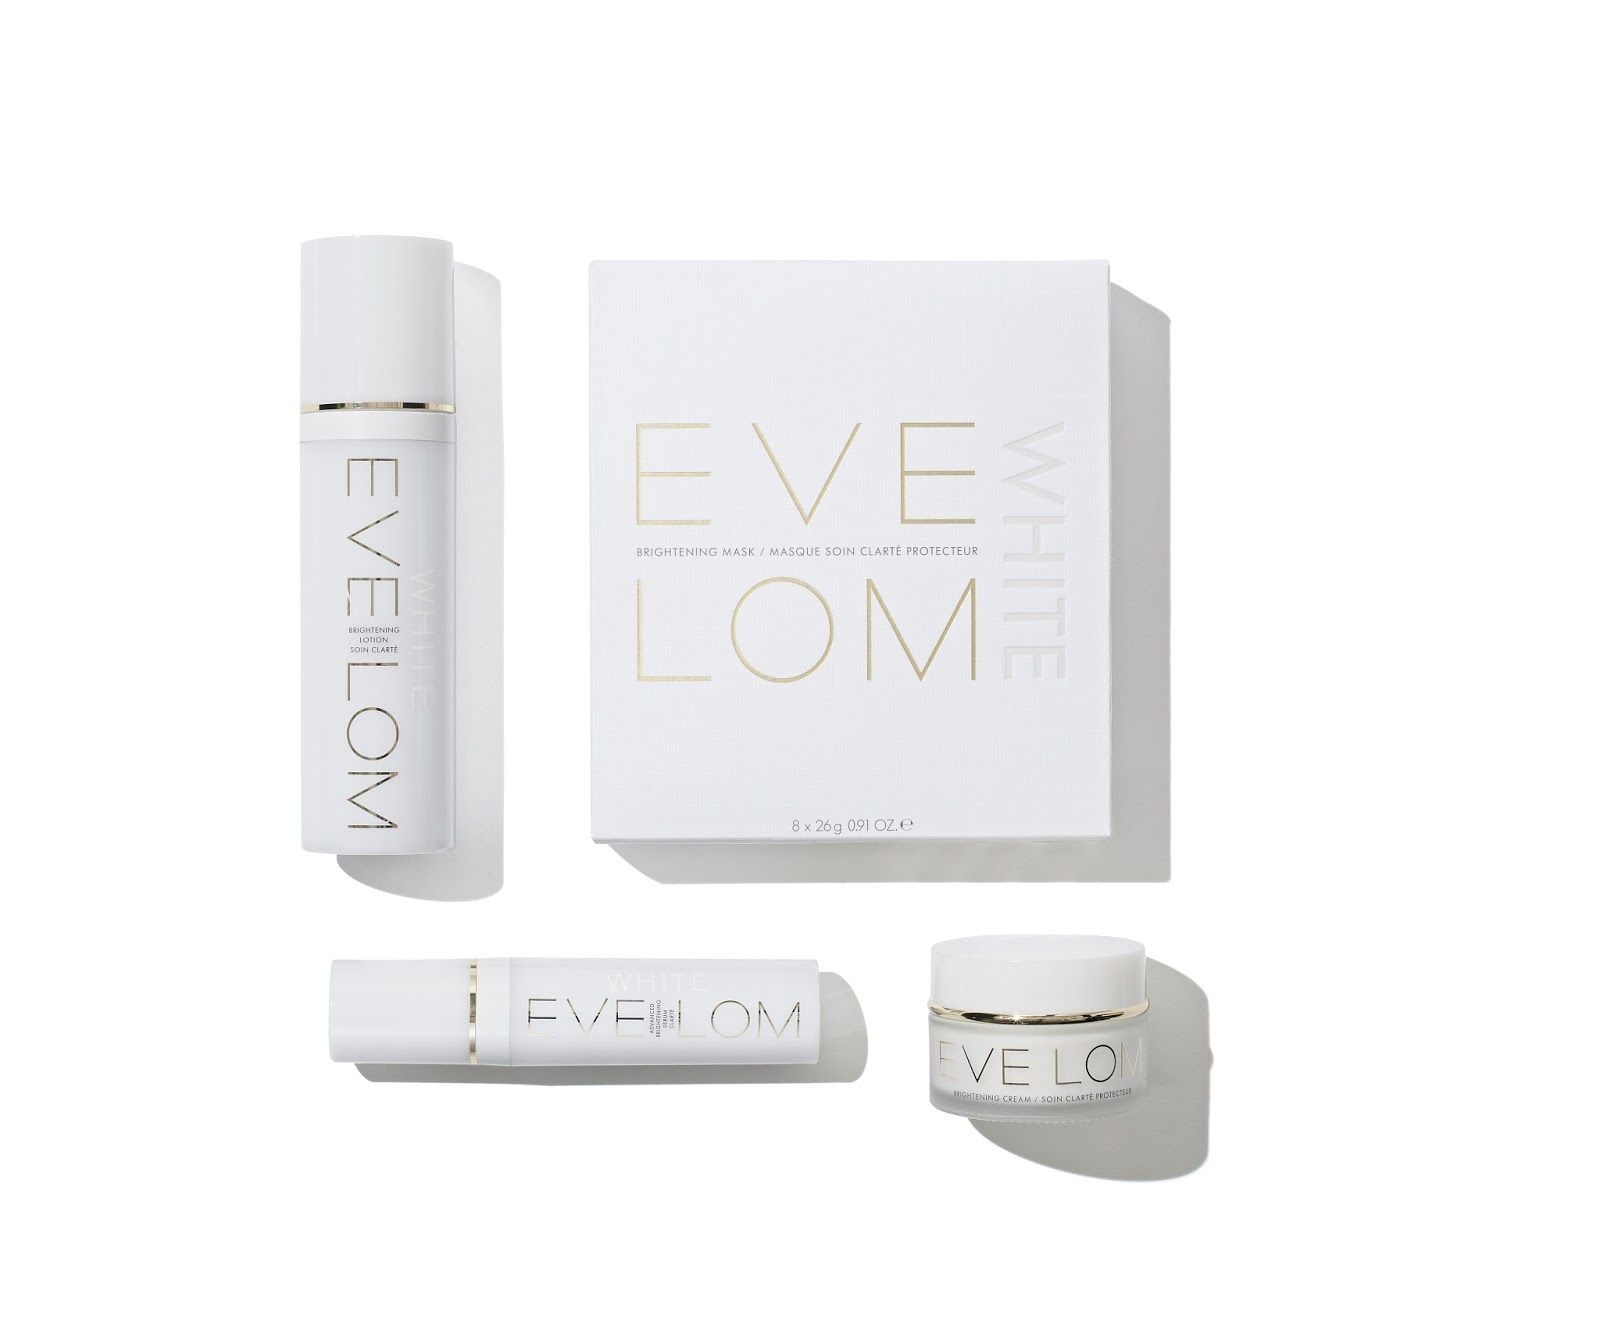 The White Collection de Eve Lom